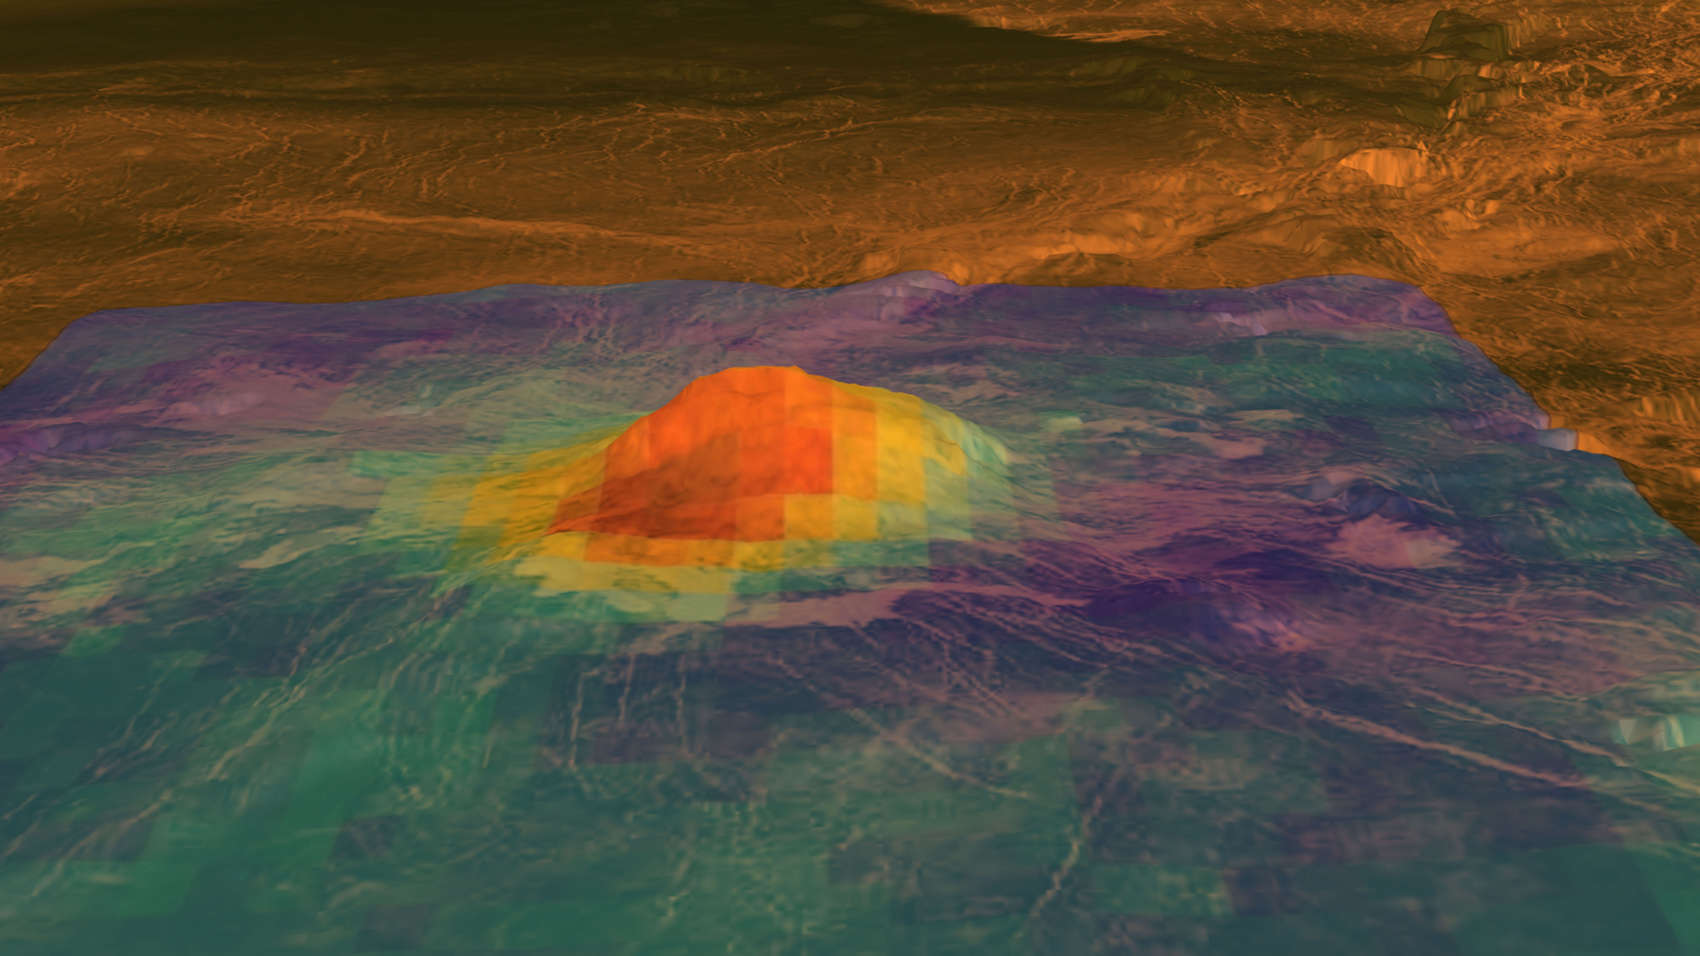 Idunn Mons, a volcano on Venus, may still be active; this topographic map from the Magellan probe has been overlayed by thermal data from Venus Express to show the top of the peak is still hot. Credit: NASA/JPL-Caltech/ESA